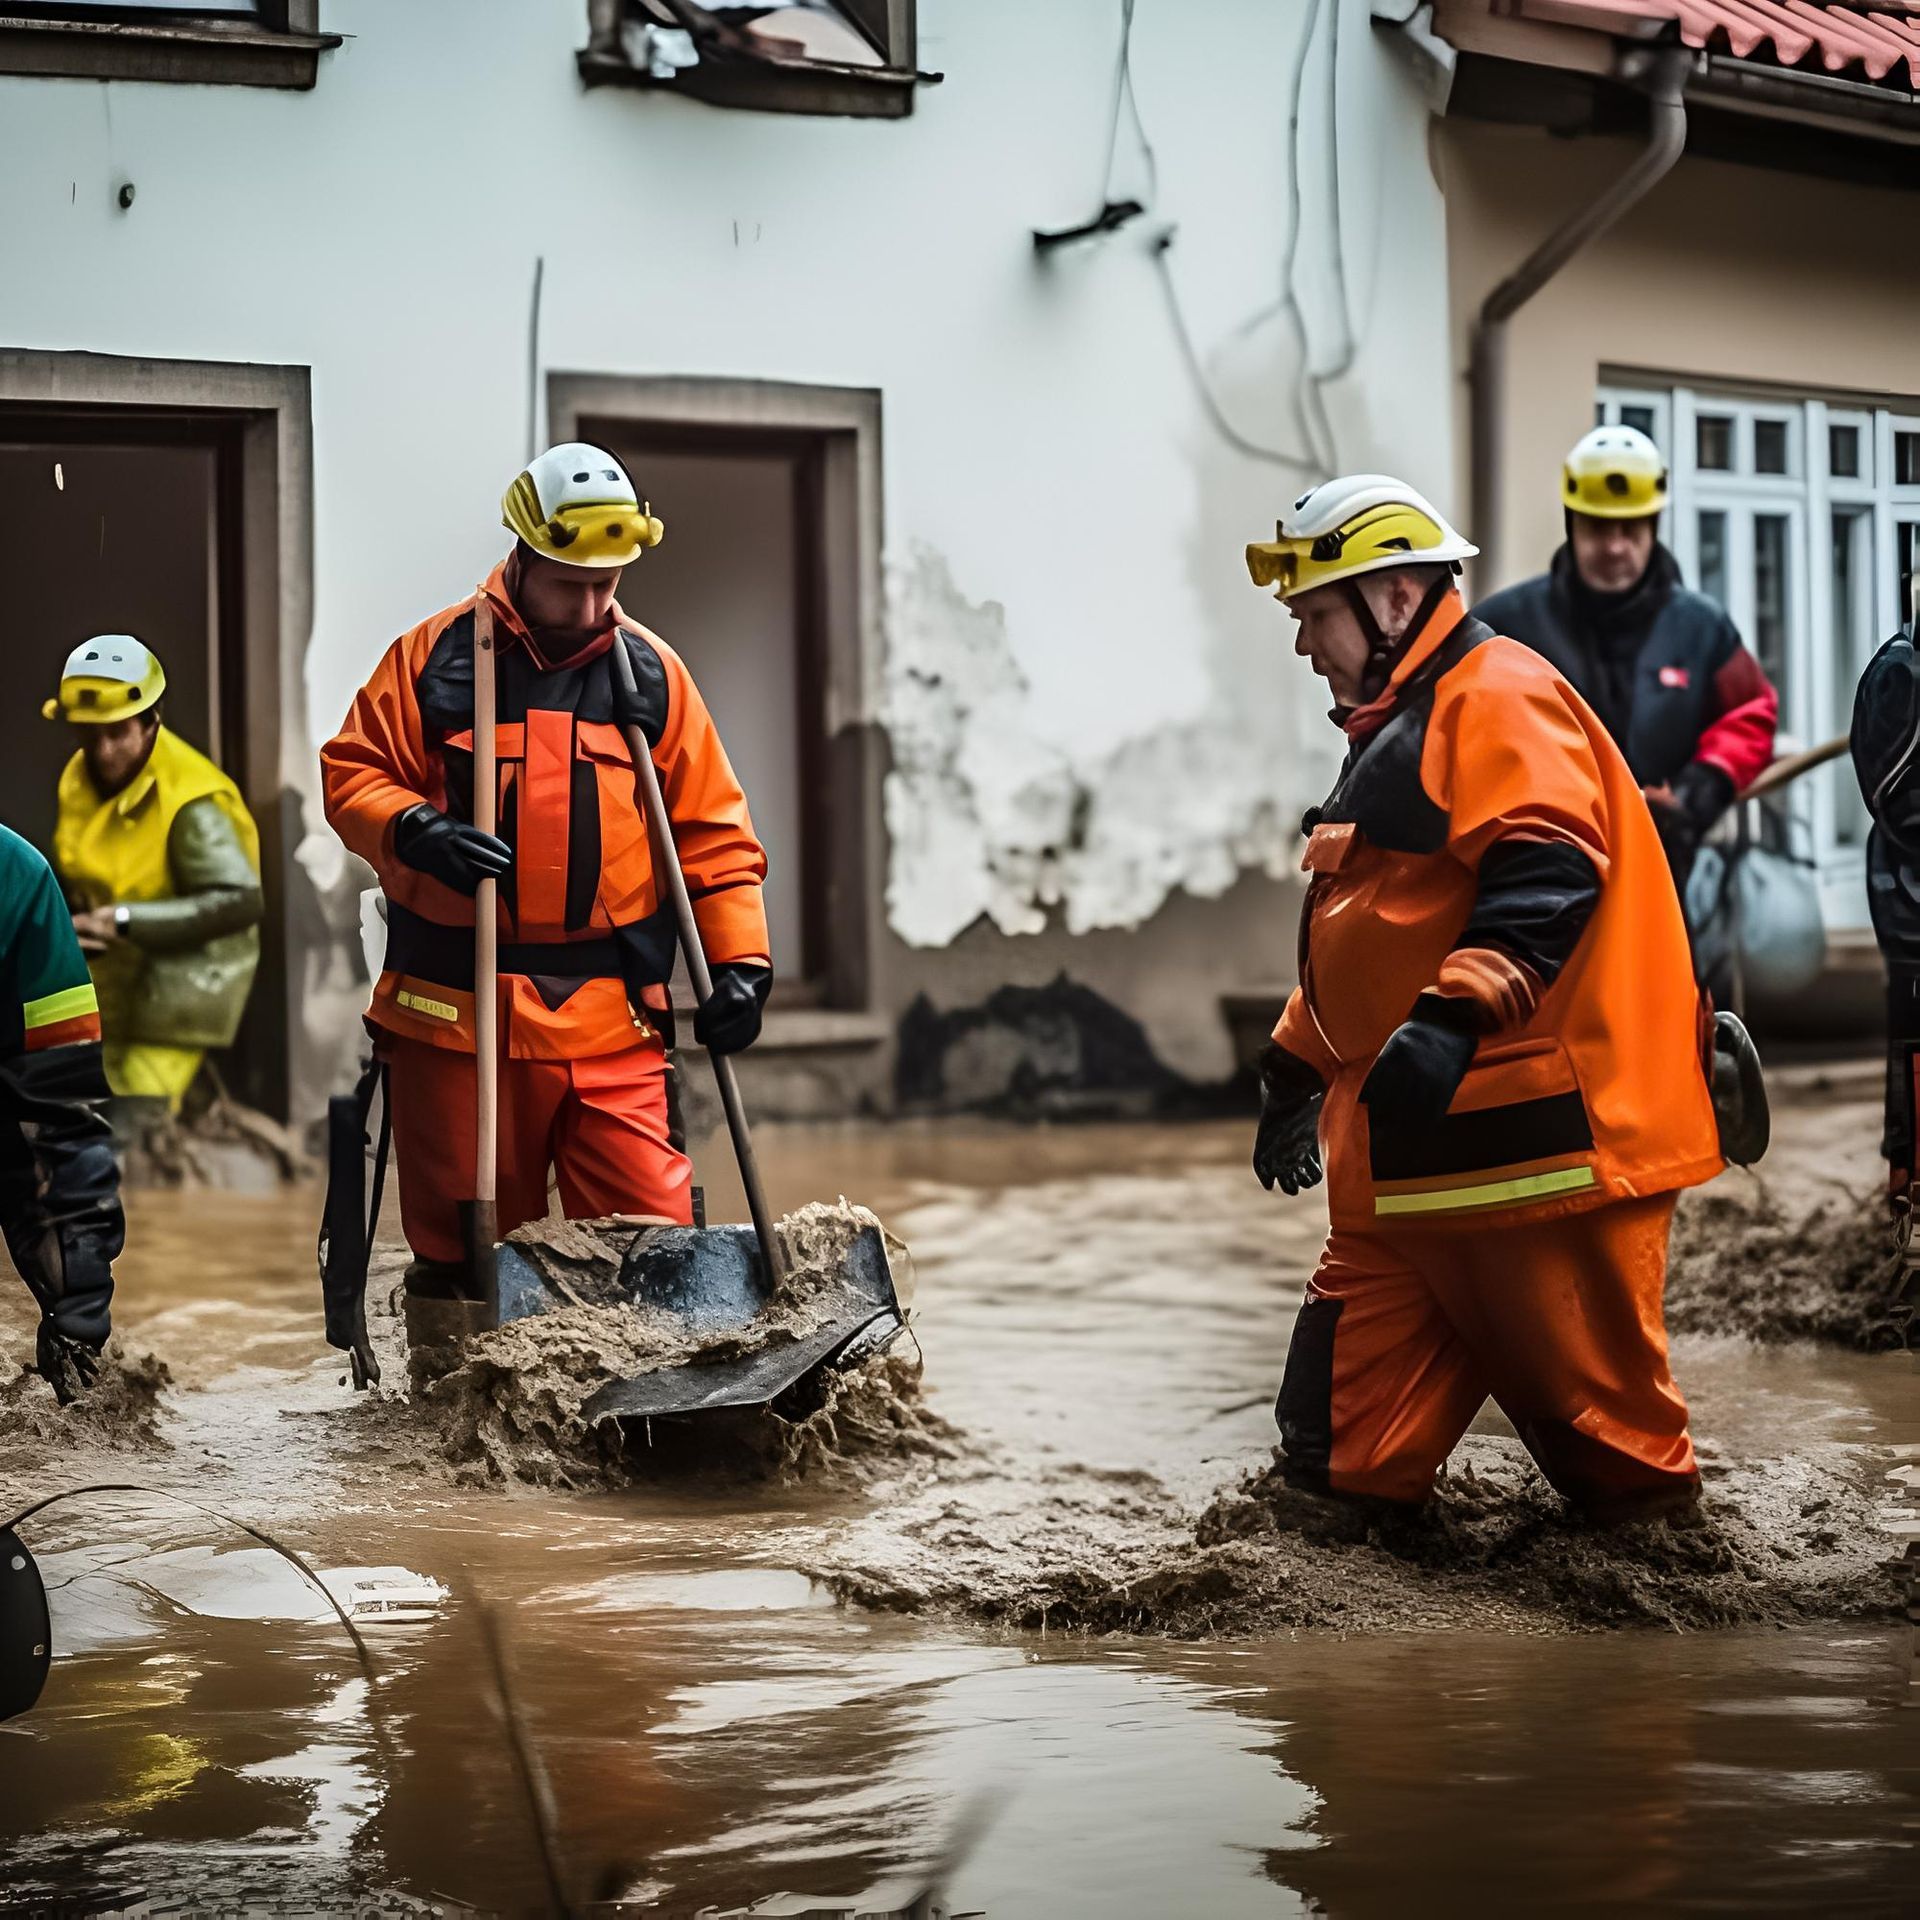 a group of firefighters are standing in a flooded area